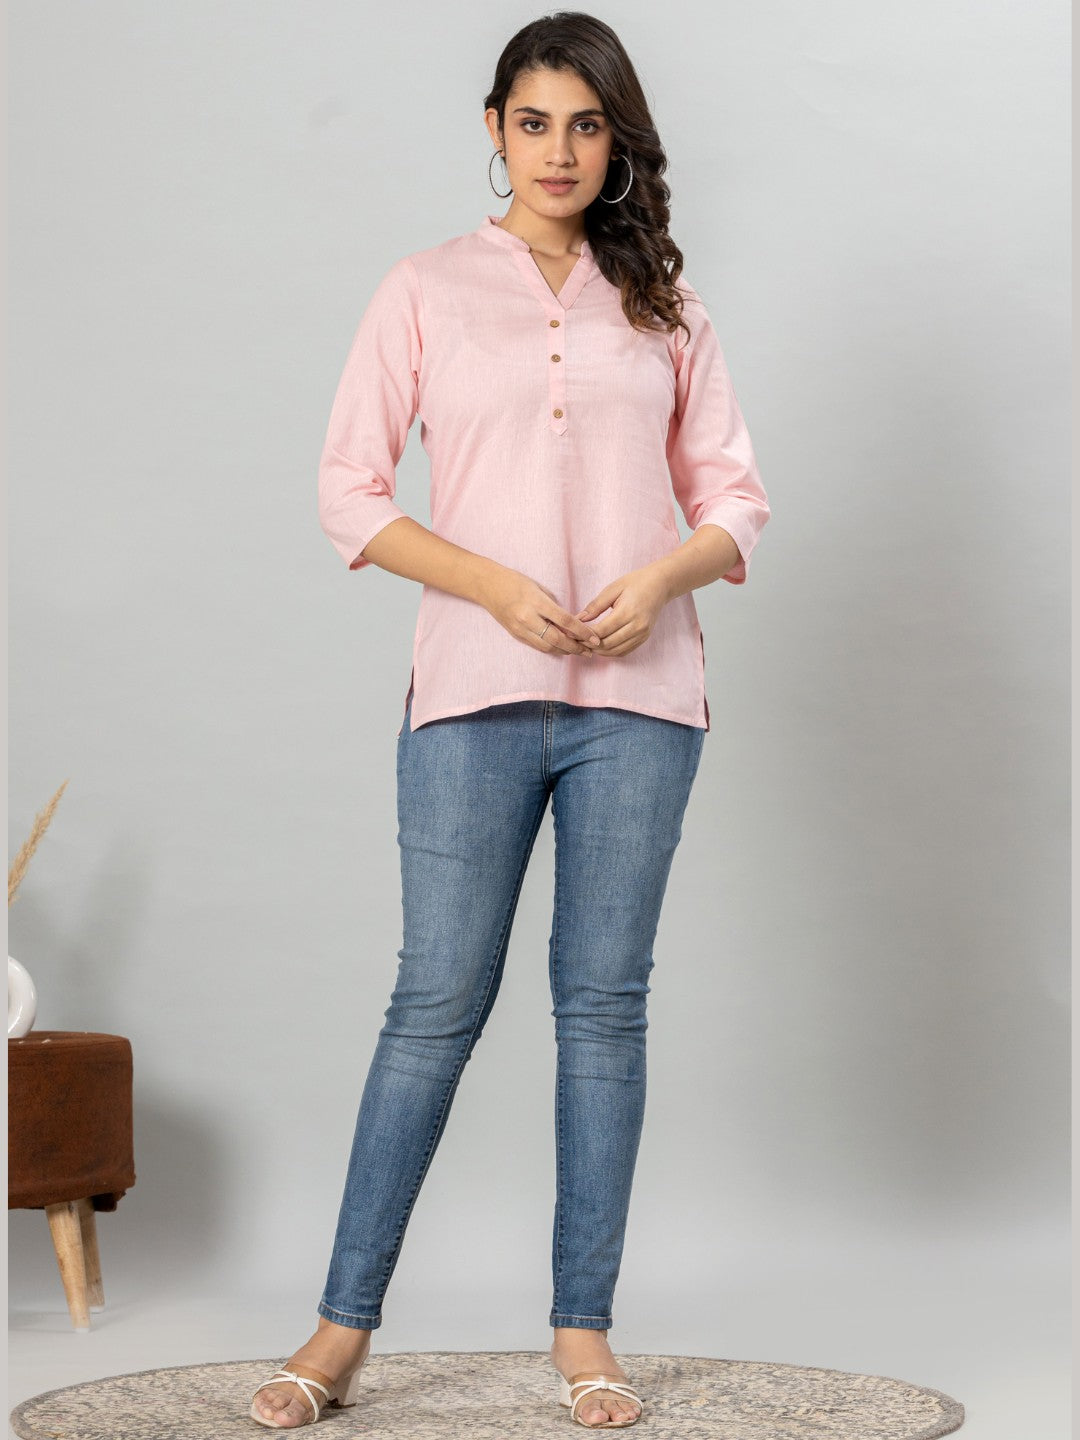 Solid Cotton Flax Women Top - Light Pink